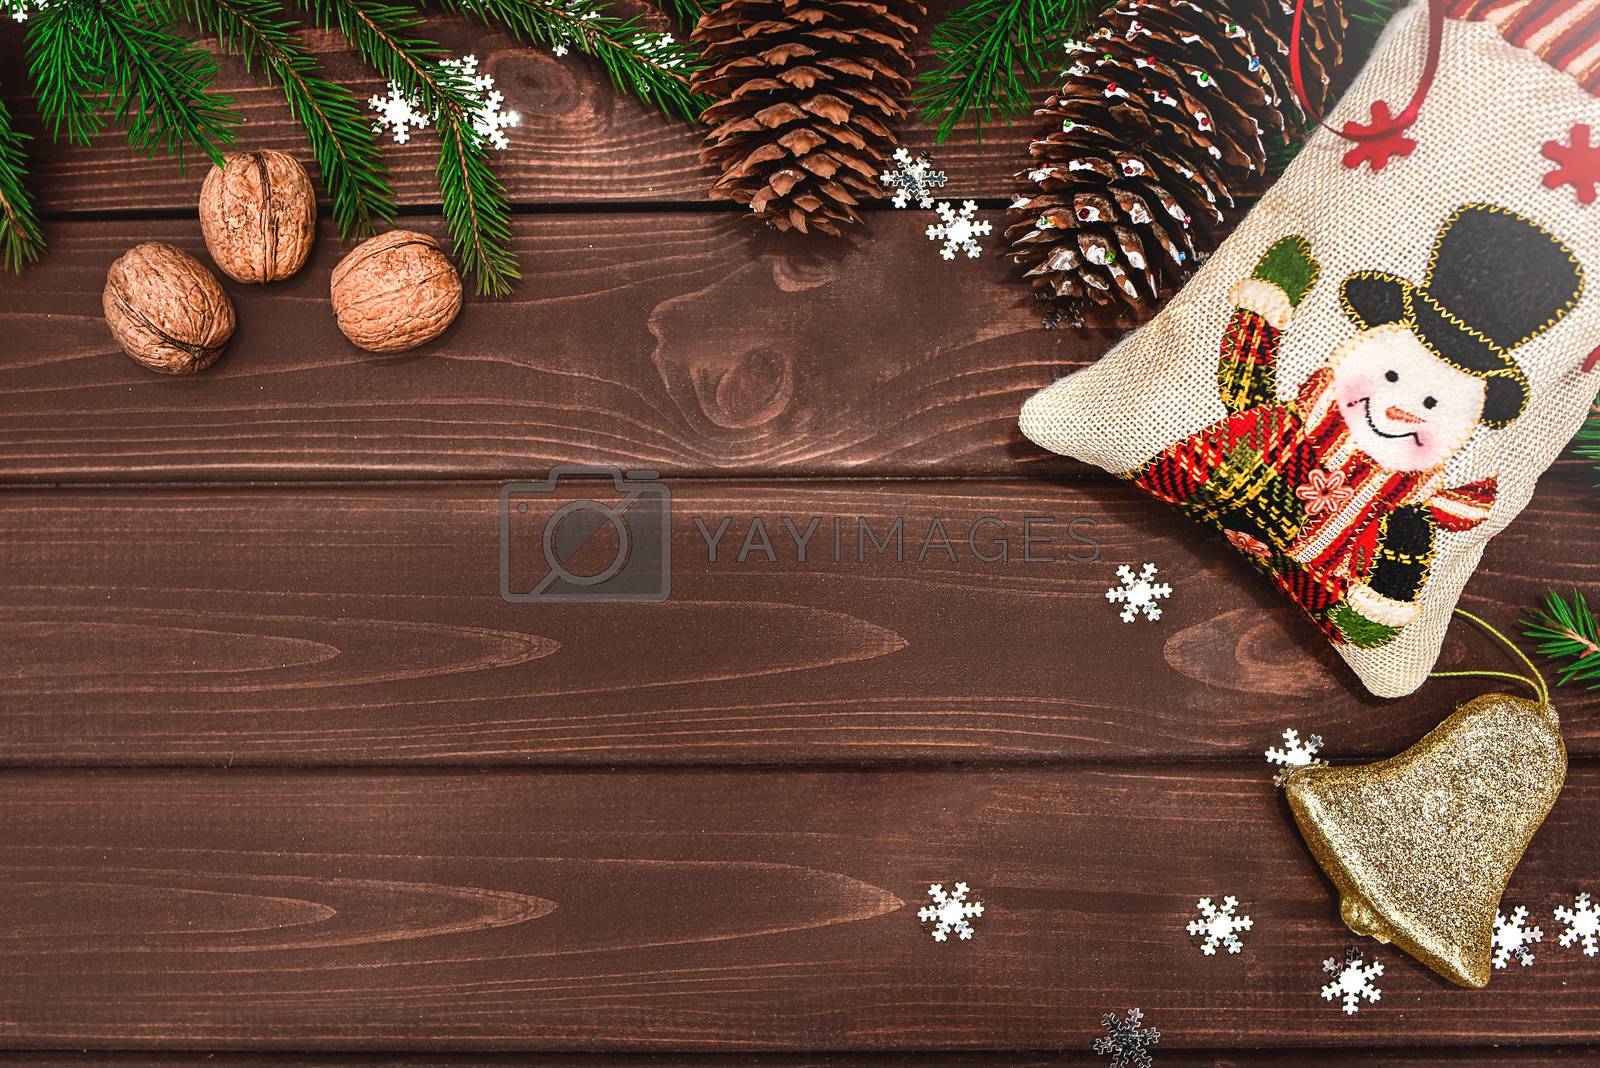 Royalty free image of Christmas background Fir branches, cones and nuts on a wooden table. Space for text. View from above. Christmas atmosphere by Nickstock